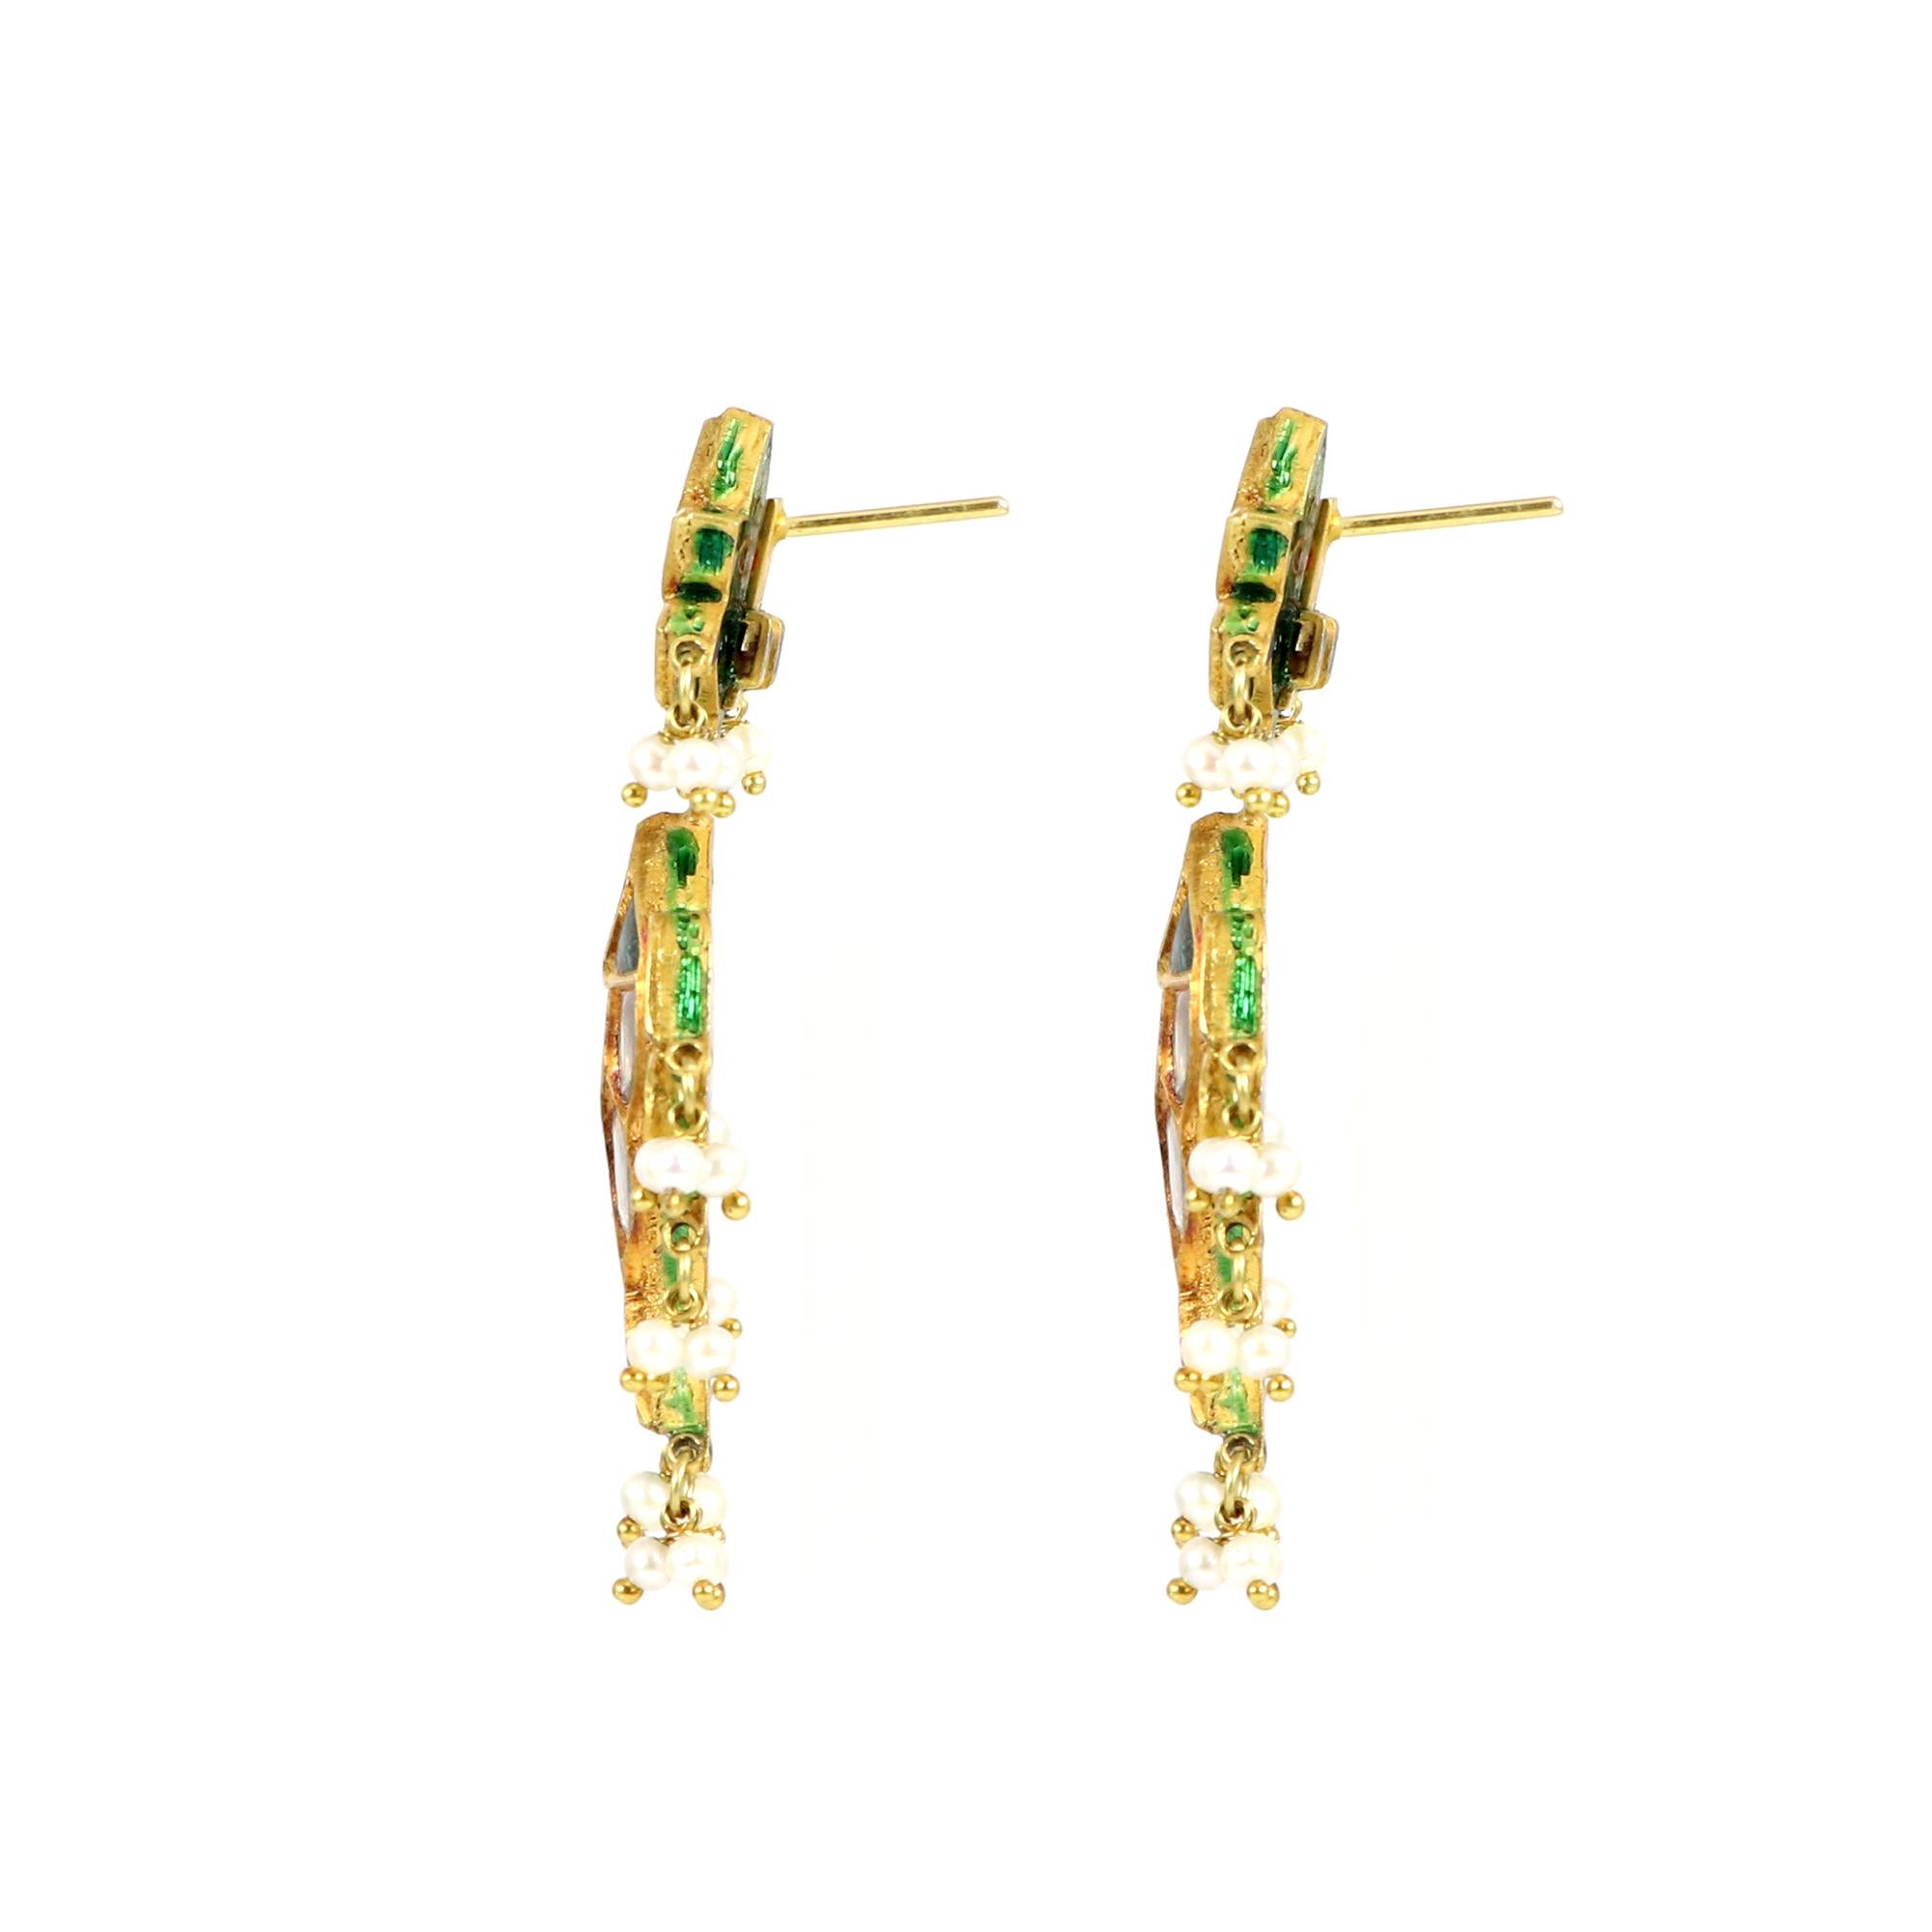 Introducing our exquisite fish-shaped earrings, crafted with the finest polki stones and adorned with green enamel. These captivating earrings are a perfect blend of elegance and uniqueness, designed to make a statement wherever you go. The fish